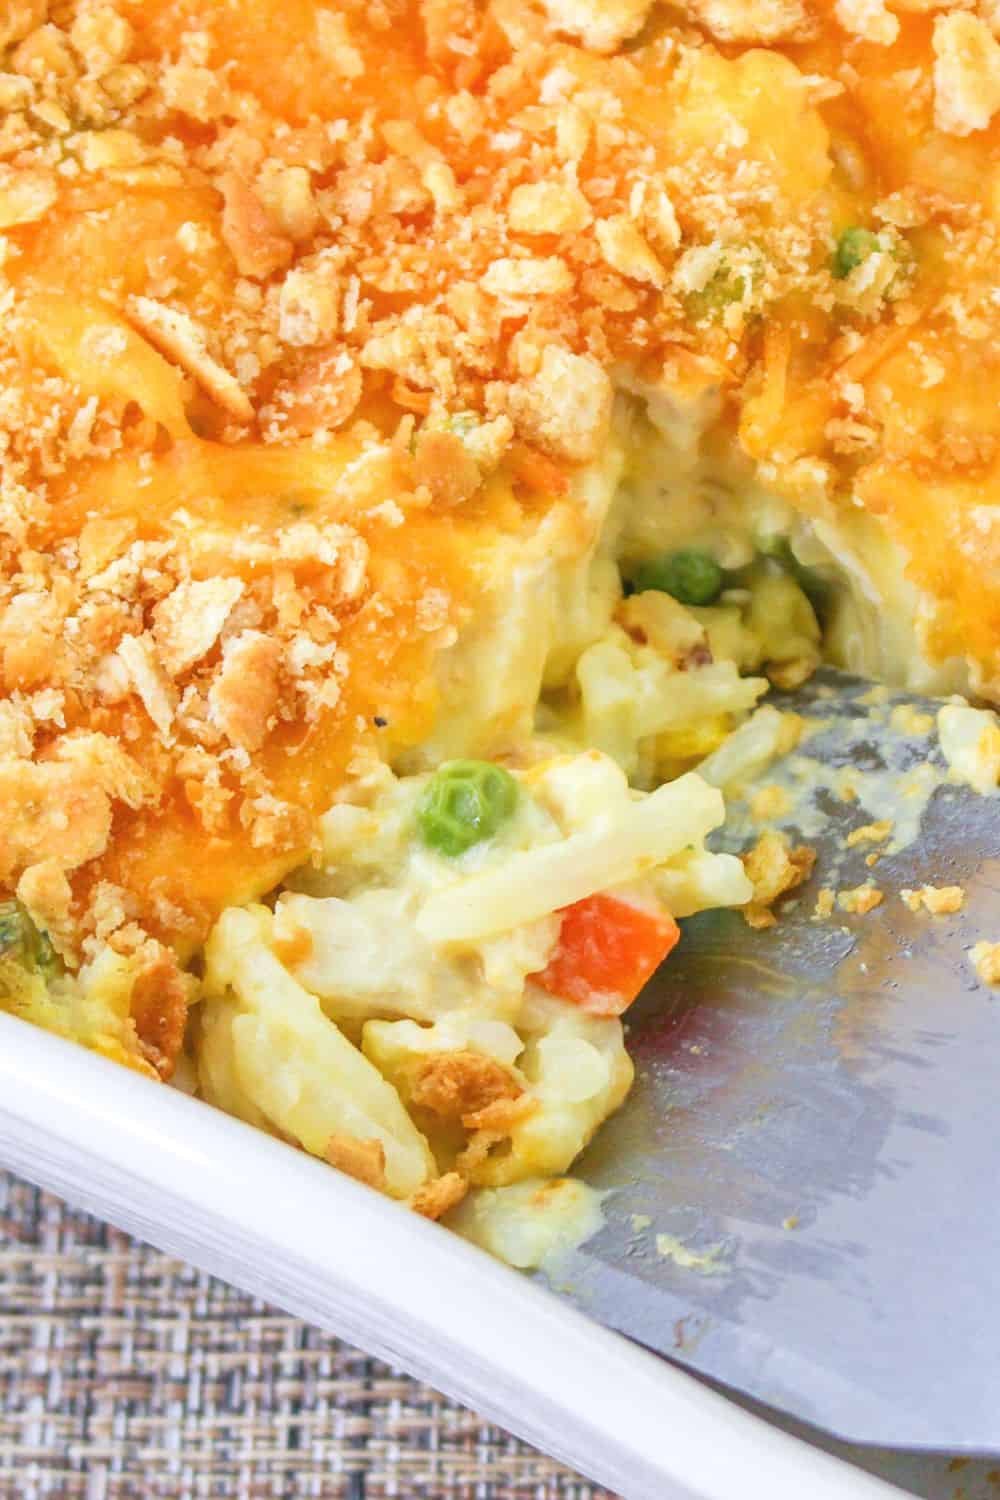 close-up view of the inside of the chicken and hash brown casserole, showing the potatoes, veggies, and chicken.